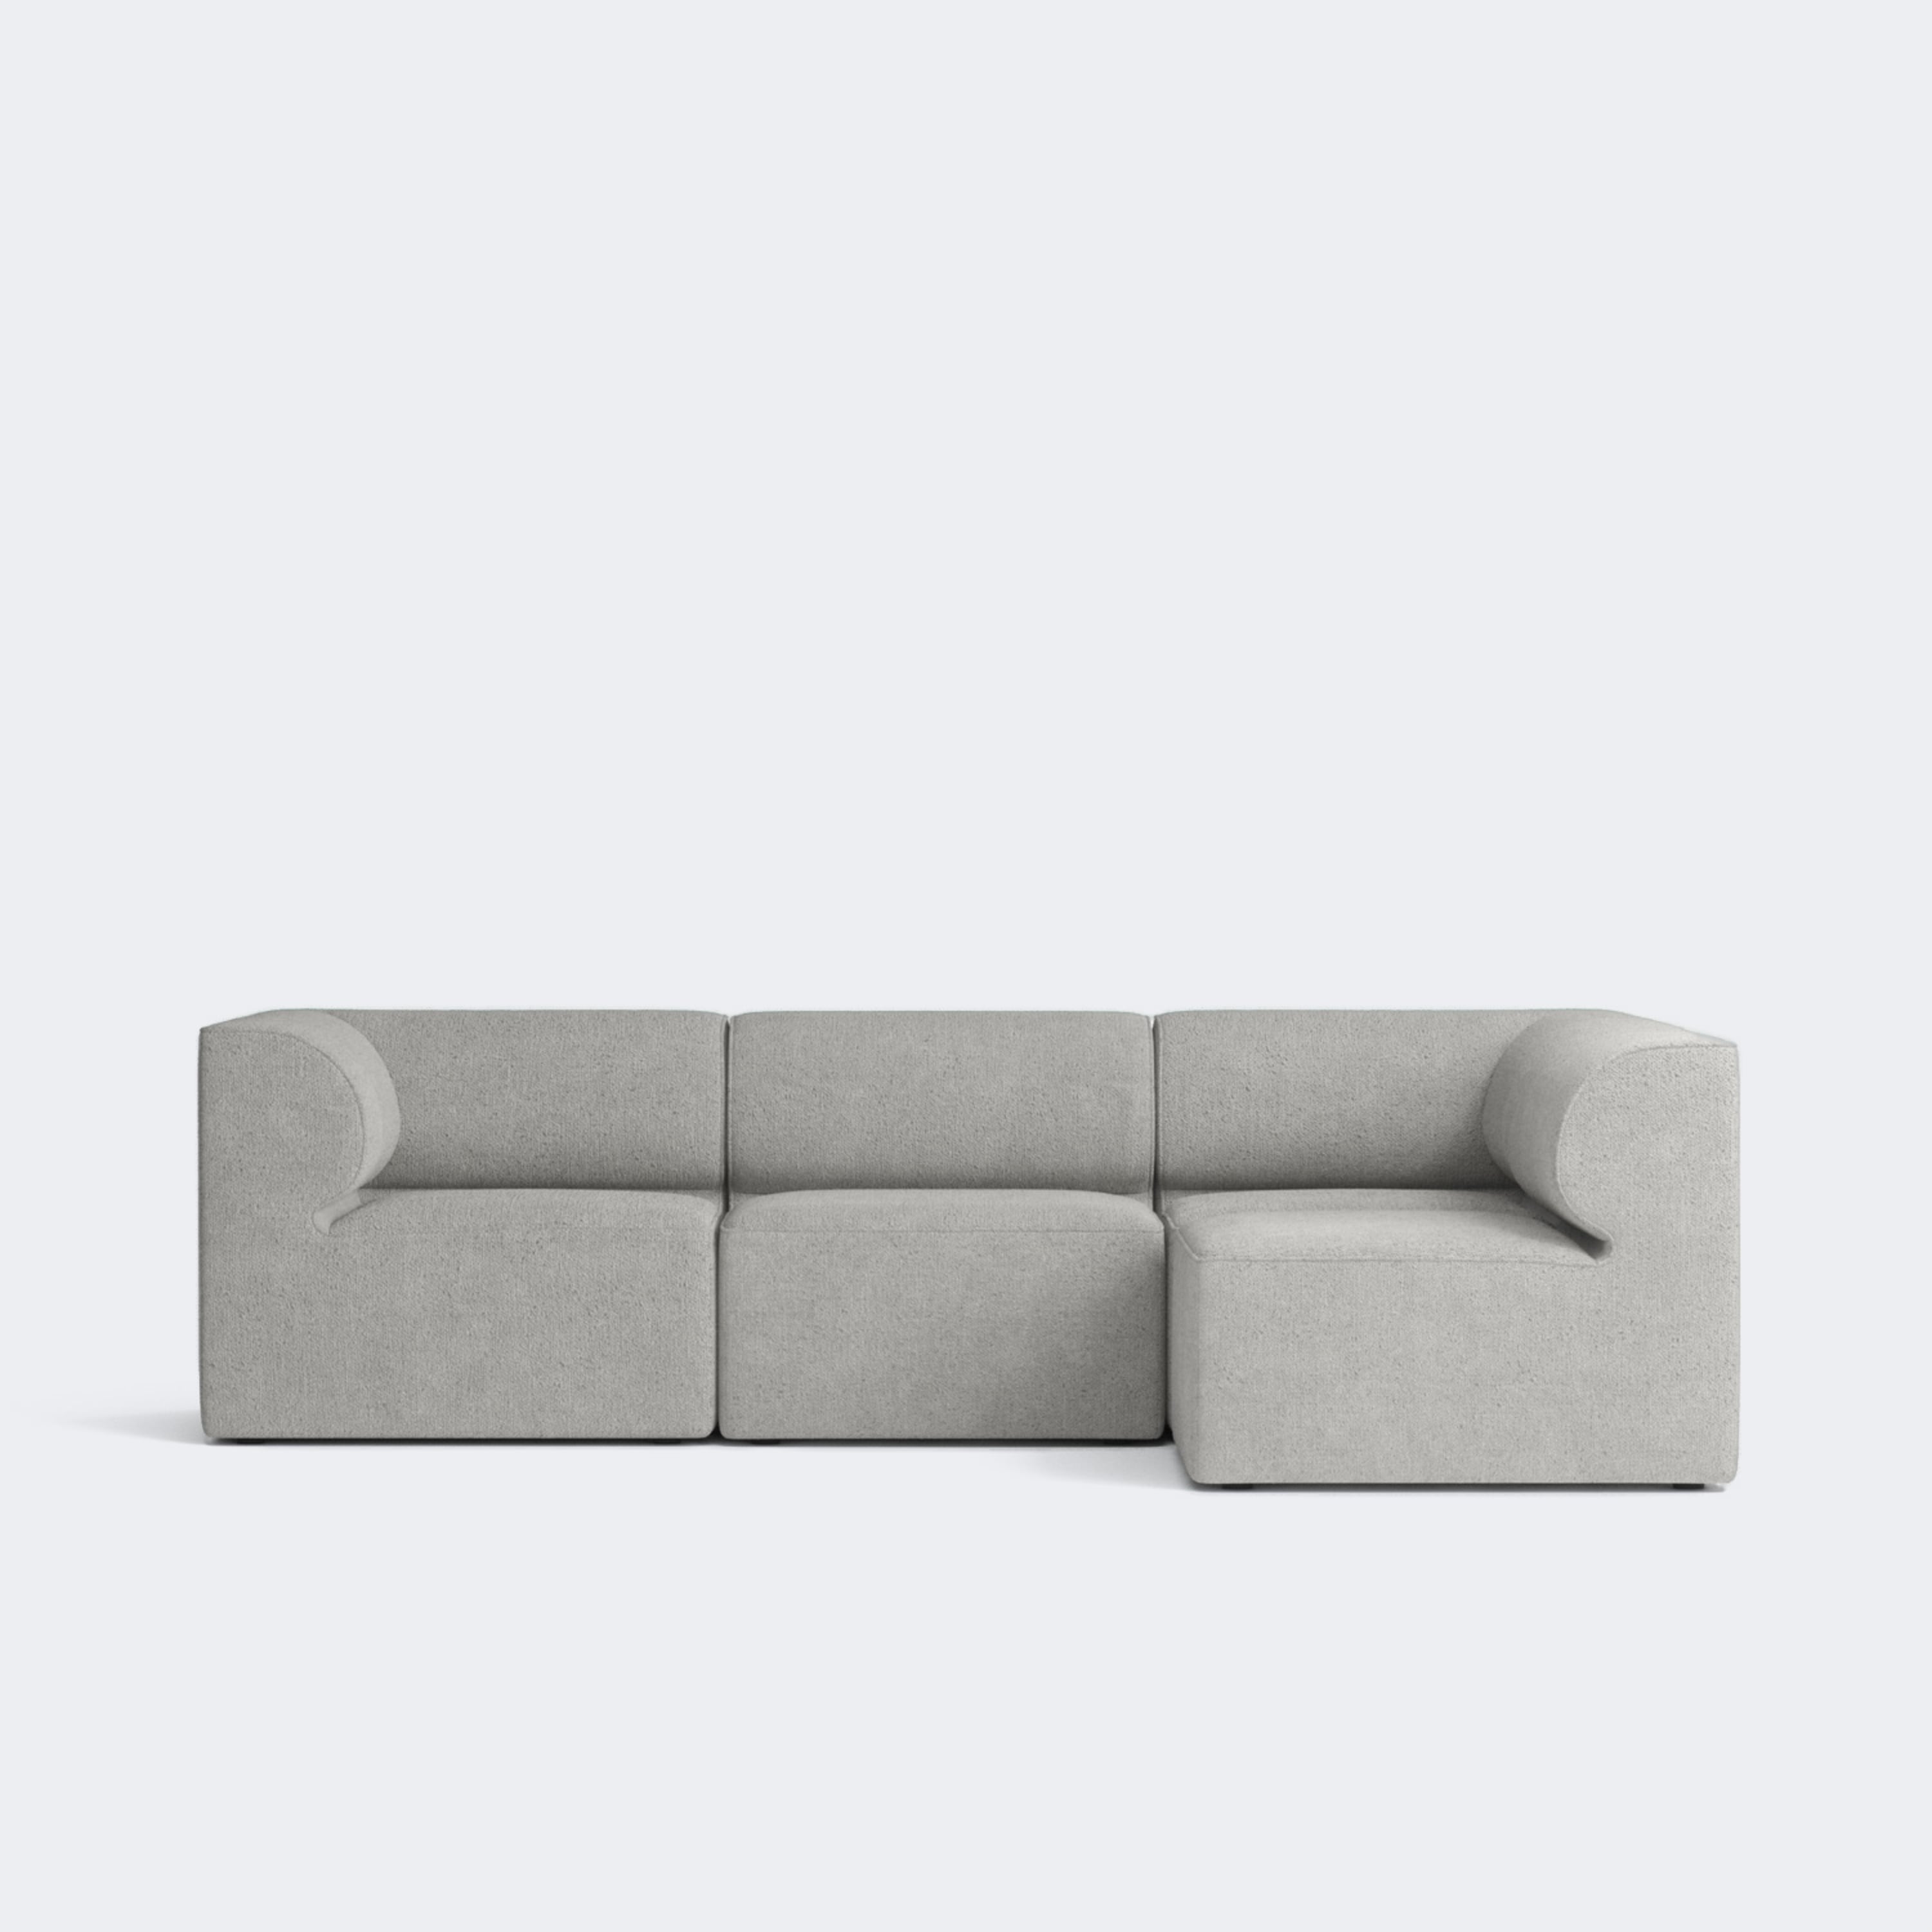 Audo Copenhagen Eave Sectional Sofa, 4-Seater Made To Order (10-12 Weeks) 4-Seater | Right Section Safire #012 - KANSO